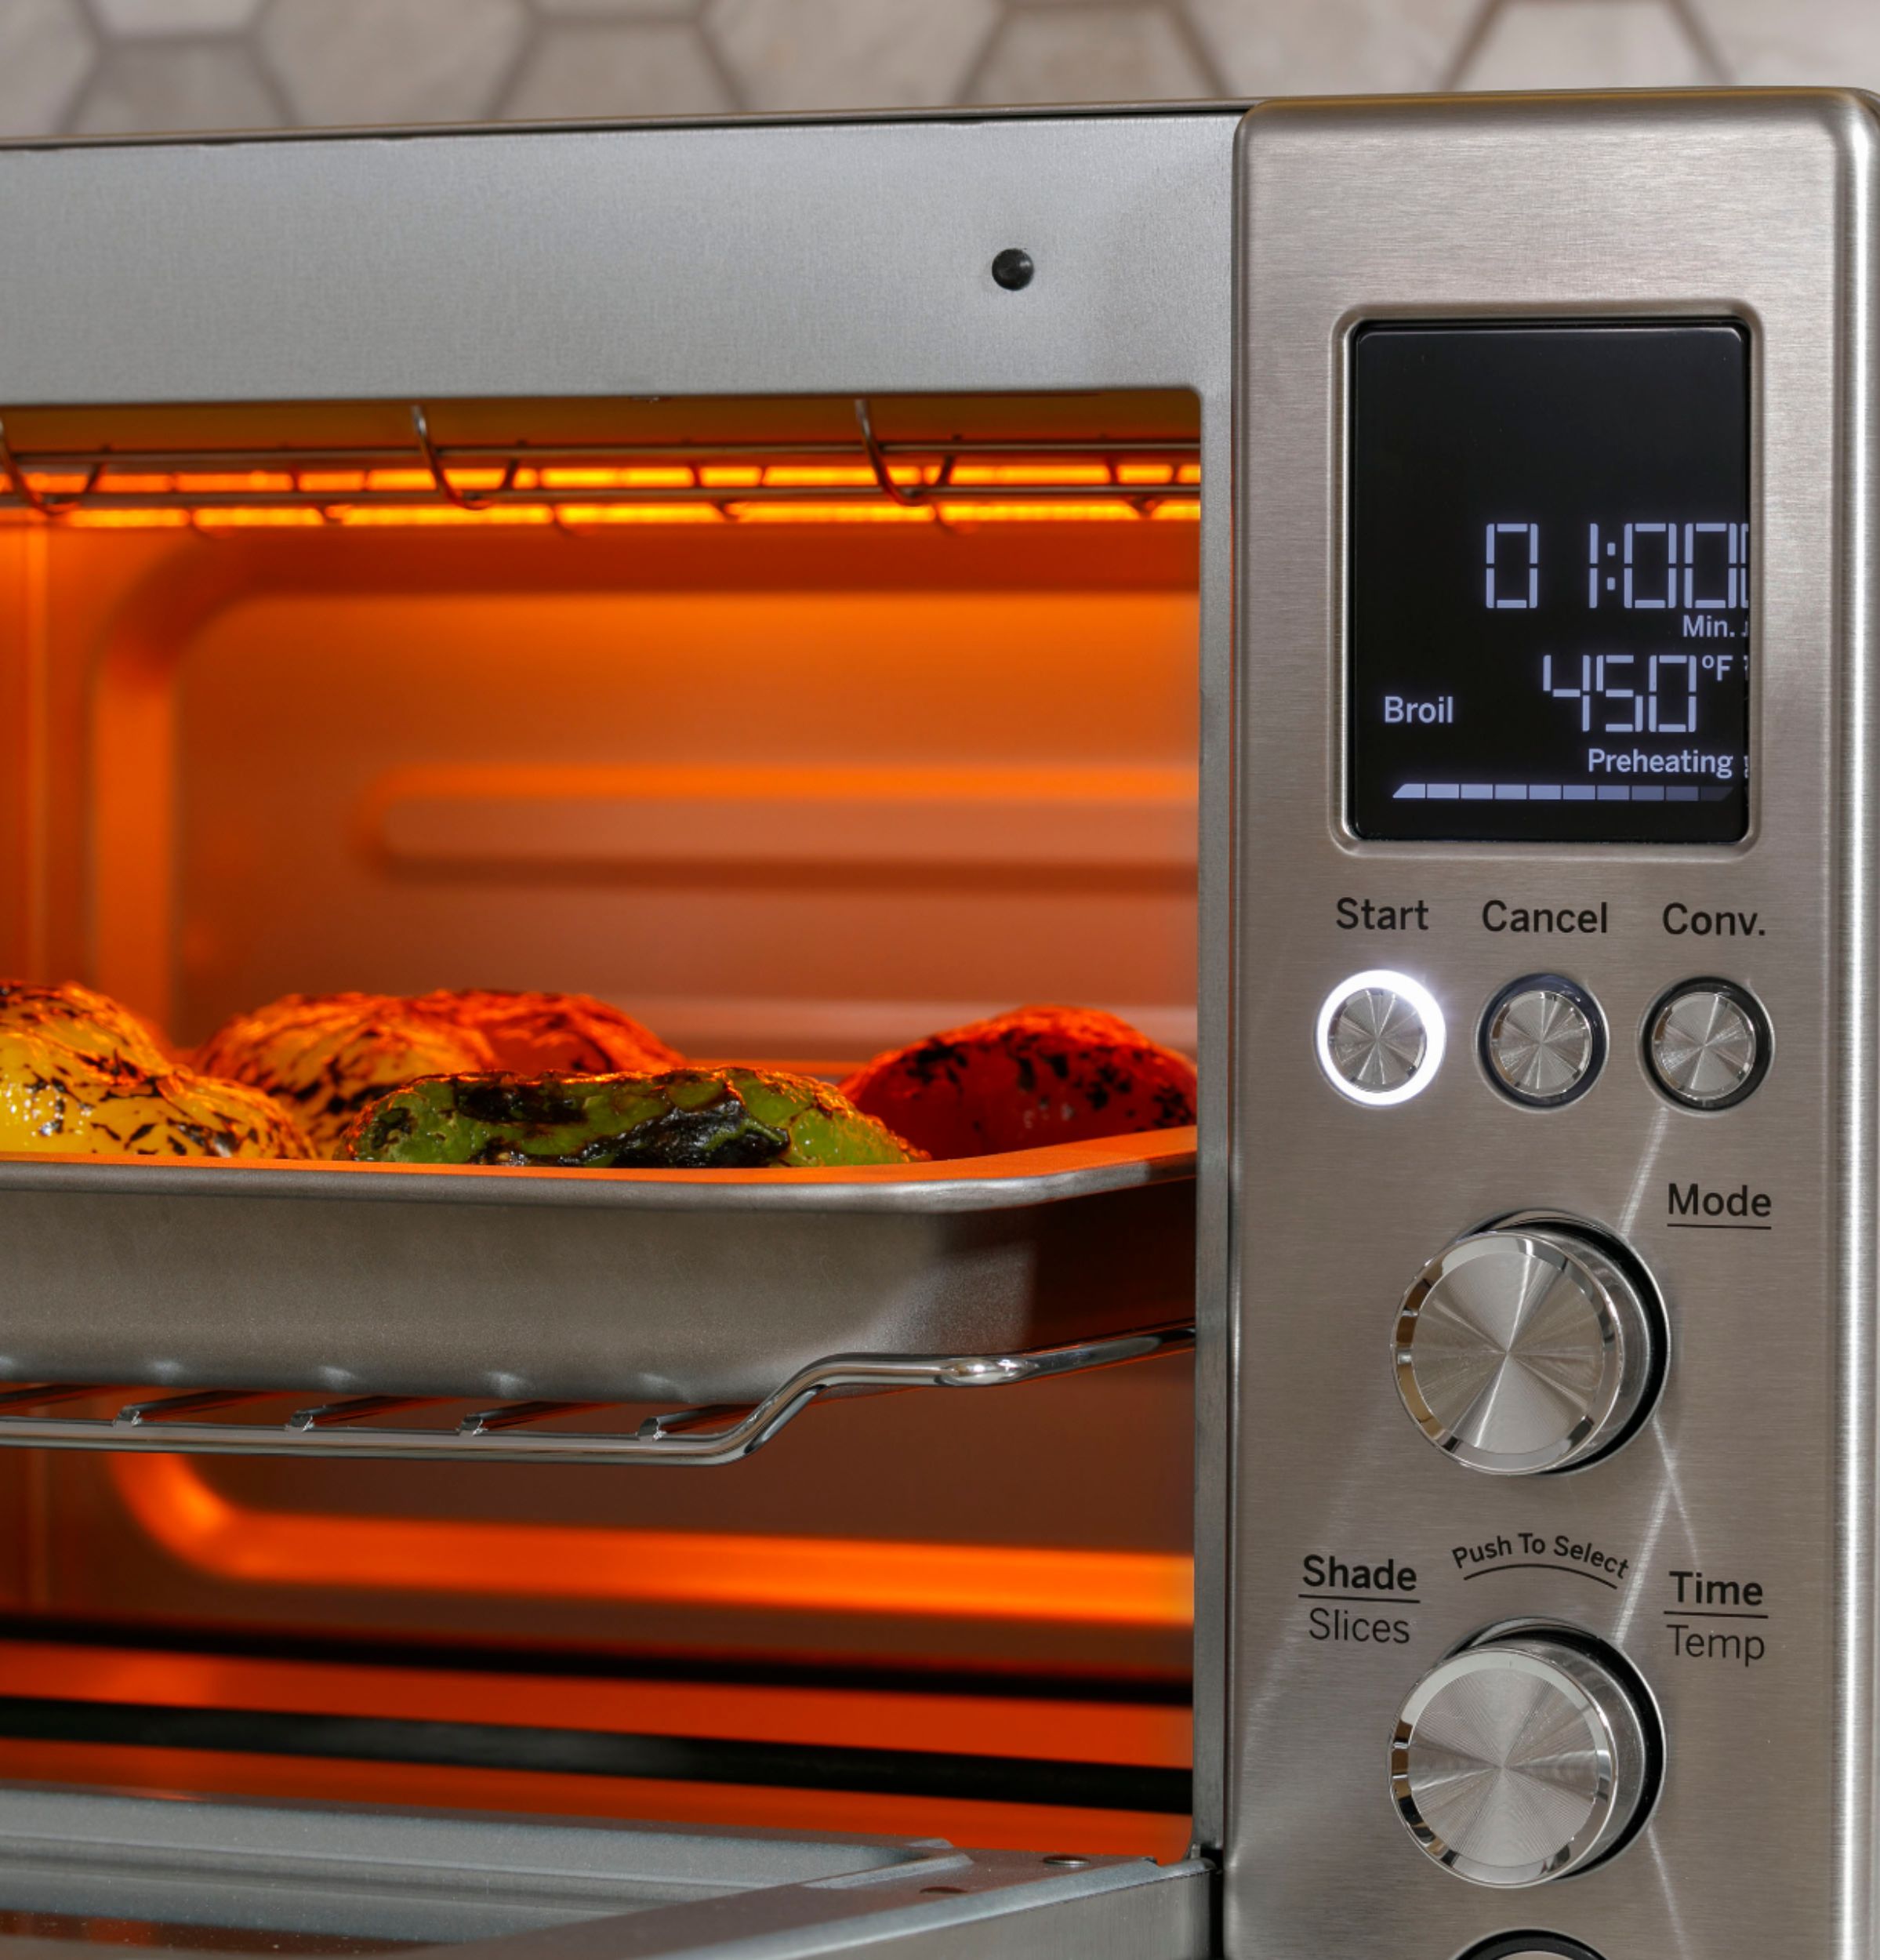 General Electric Stainless Countertop Broil Bake Convection Toaster Oven